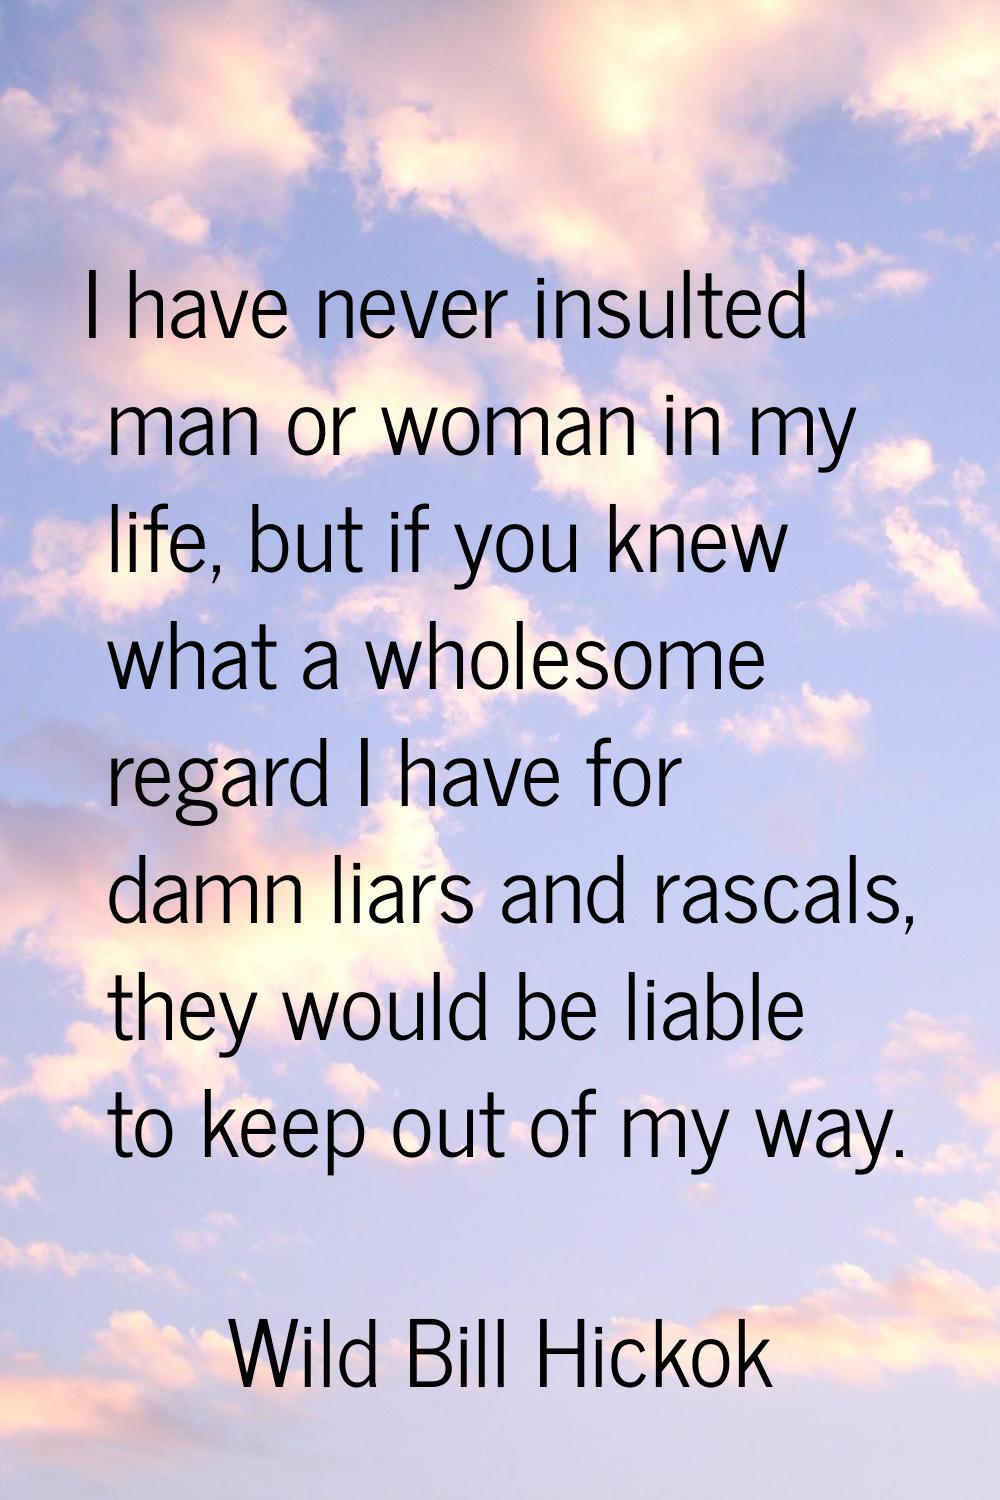 I have never insulted man or woman in my life, but if you knew what a wholesome regard I have for d